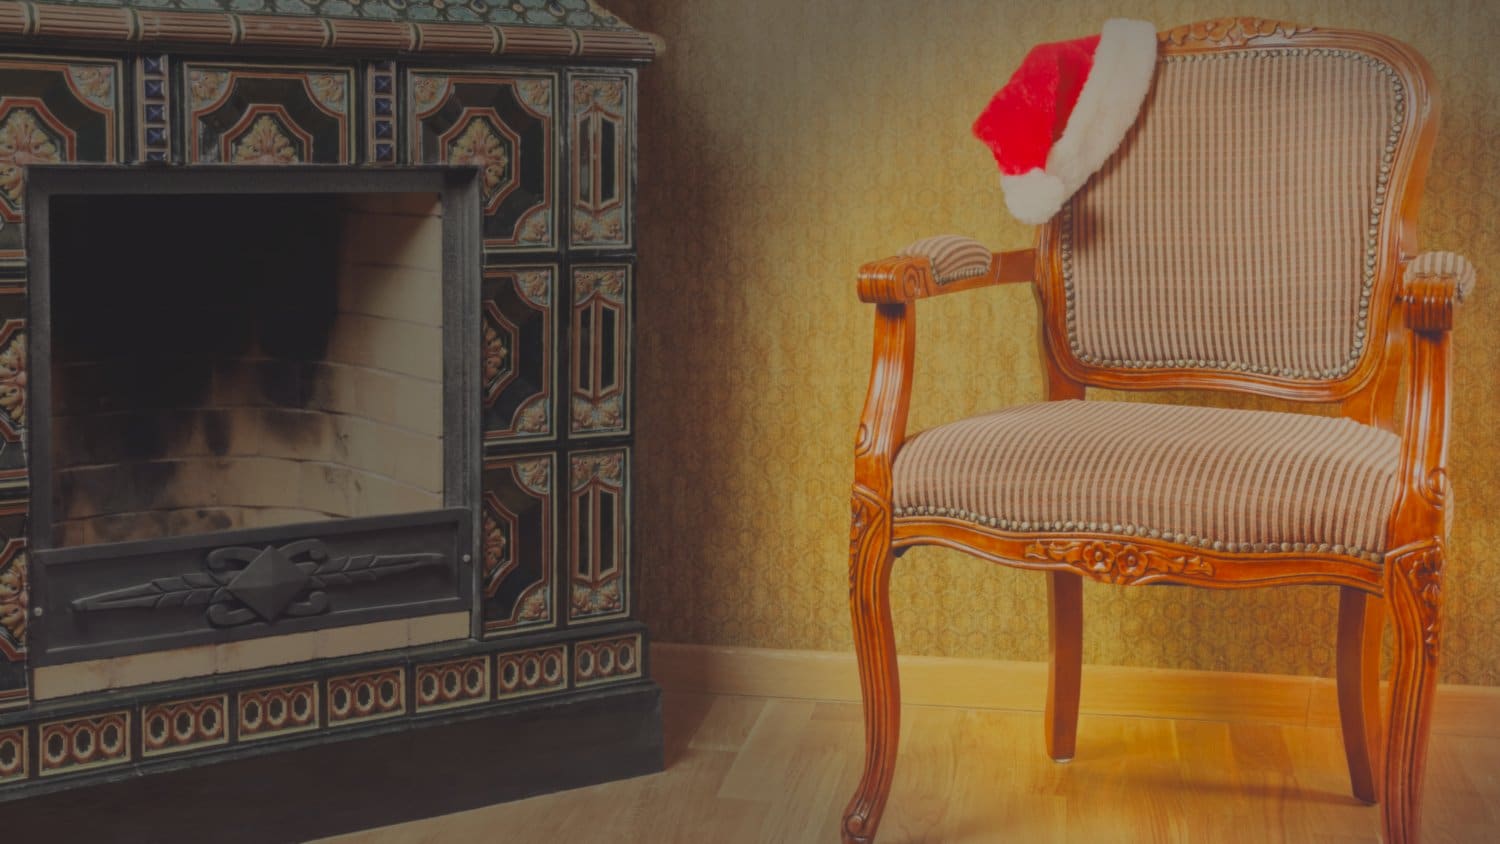 Chair with Santa hat next to fireplace.